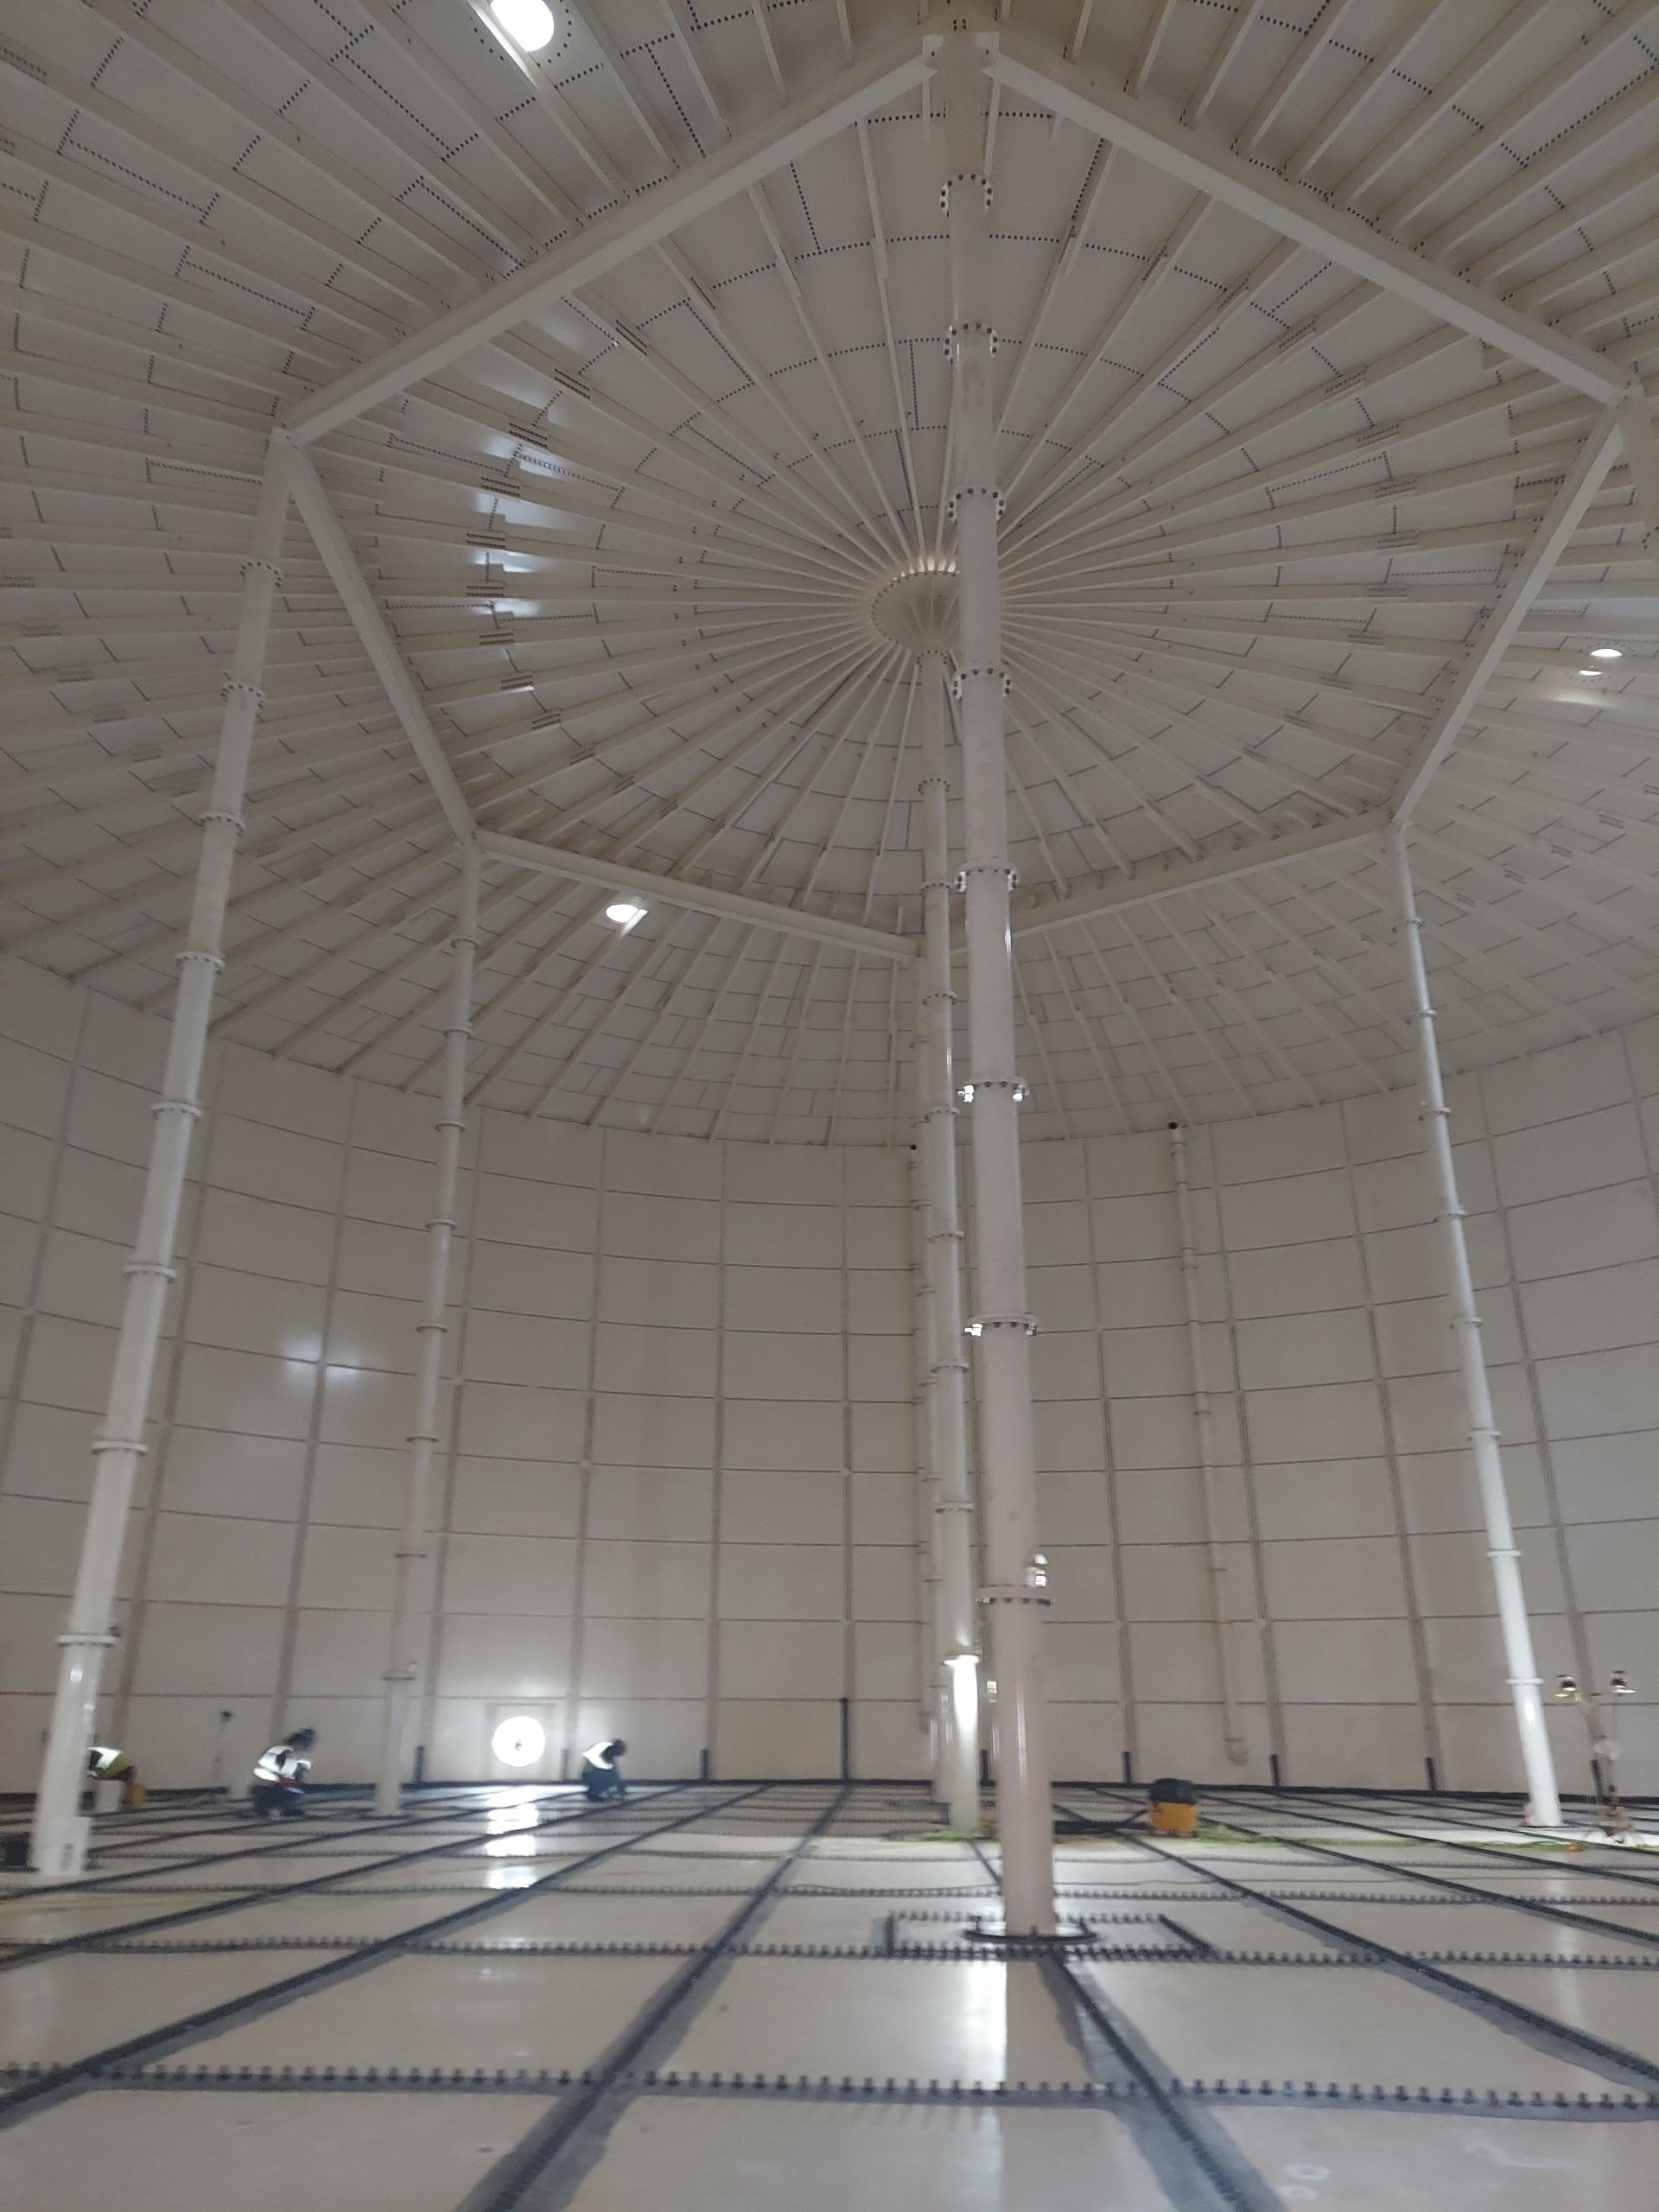 An enormous, cavernous empty room with a checkered floor, long poles, and spoked roof